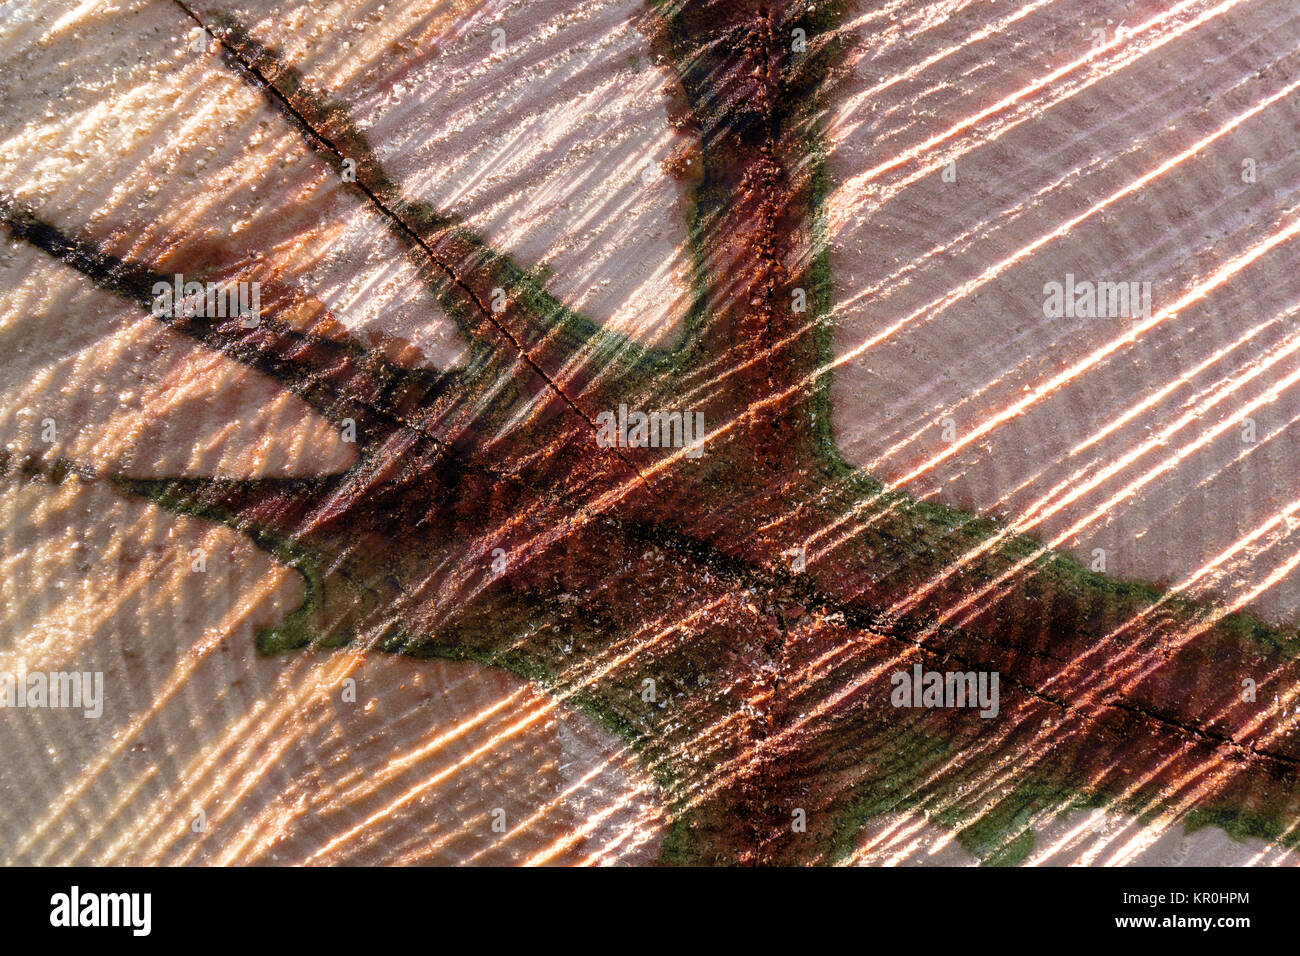 abstract pattern of a tree trunk Stock Photo